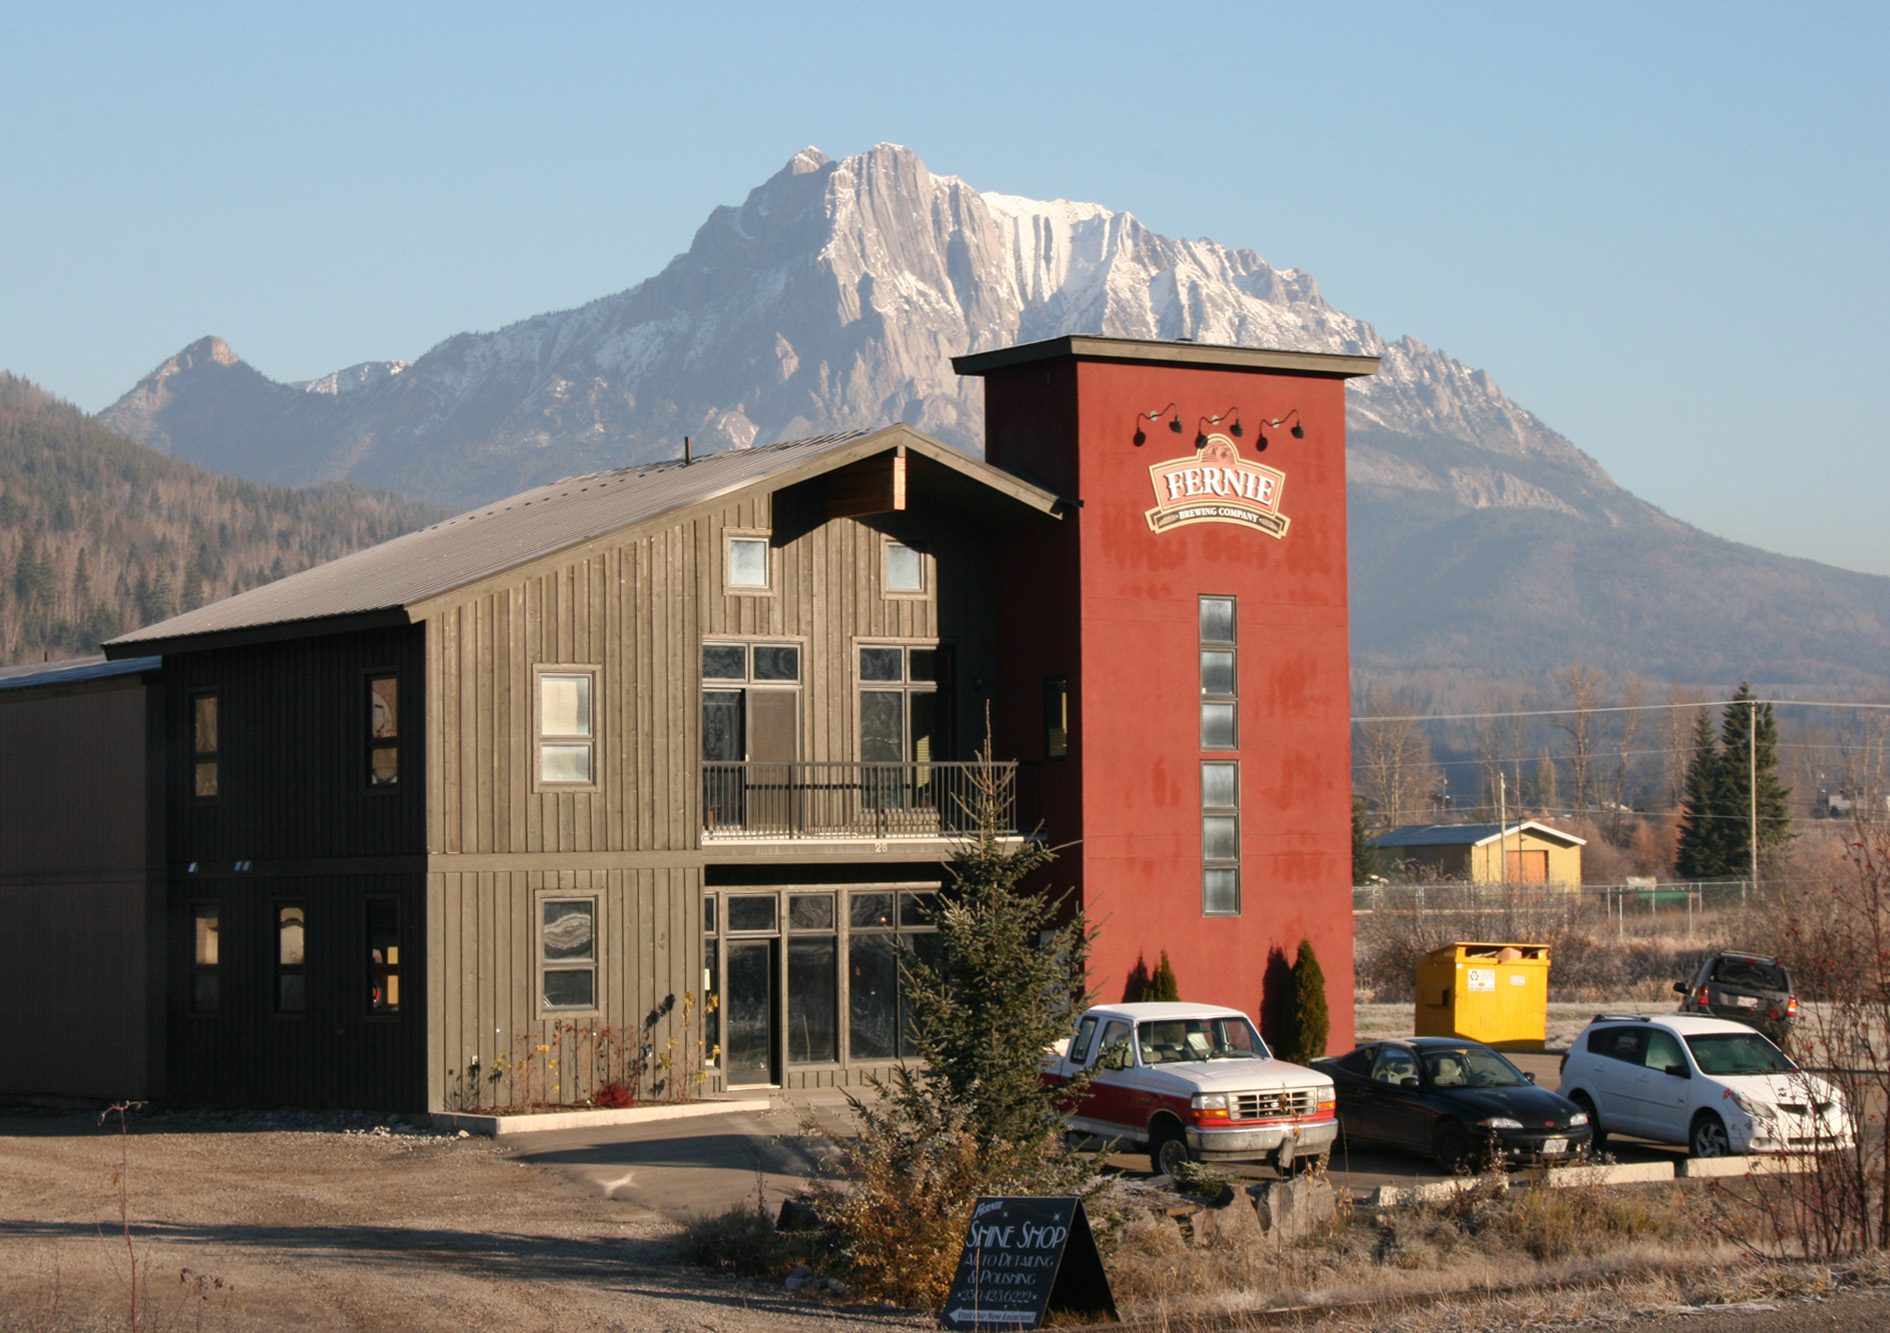 Fernie Brewing's brewery in 2007 with Mt. Hosmer in the background.